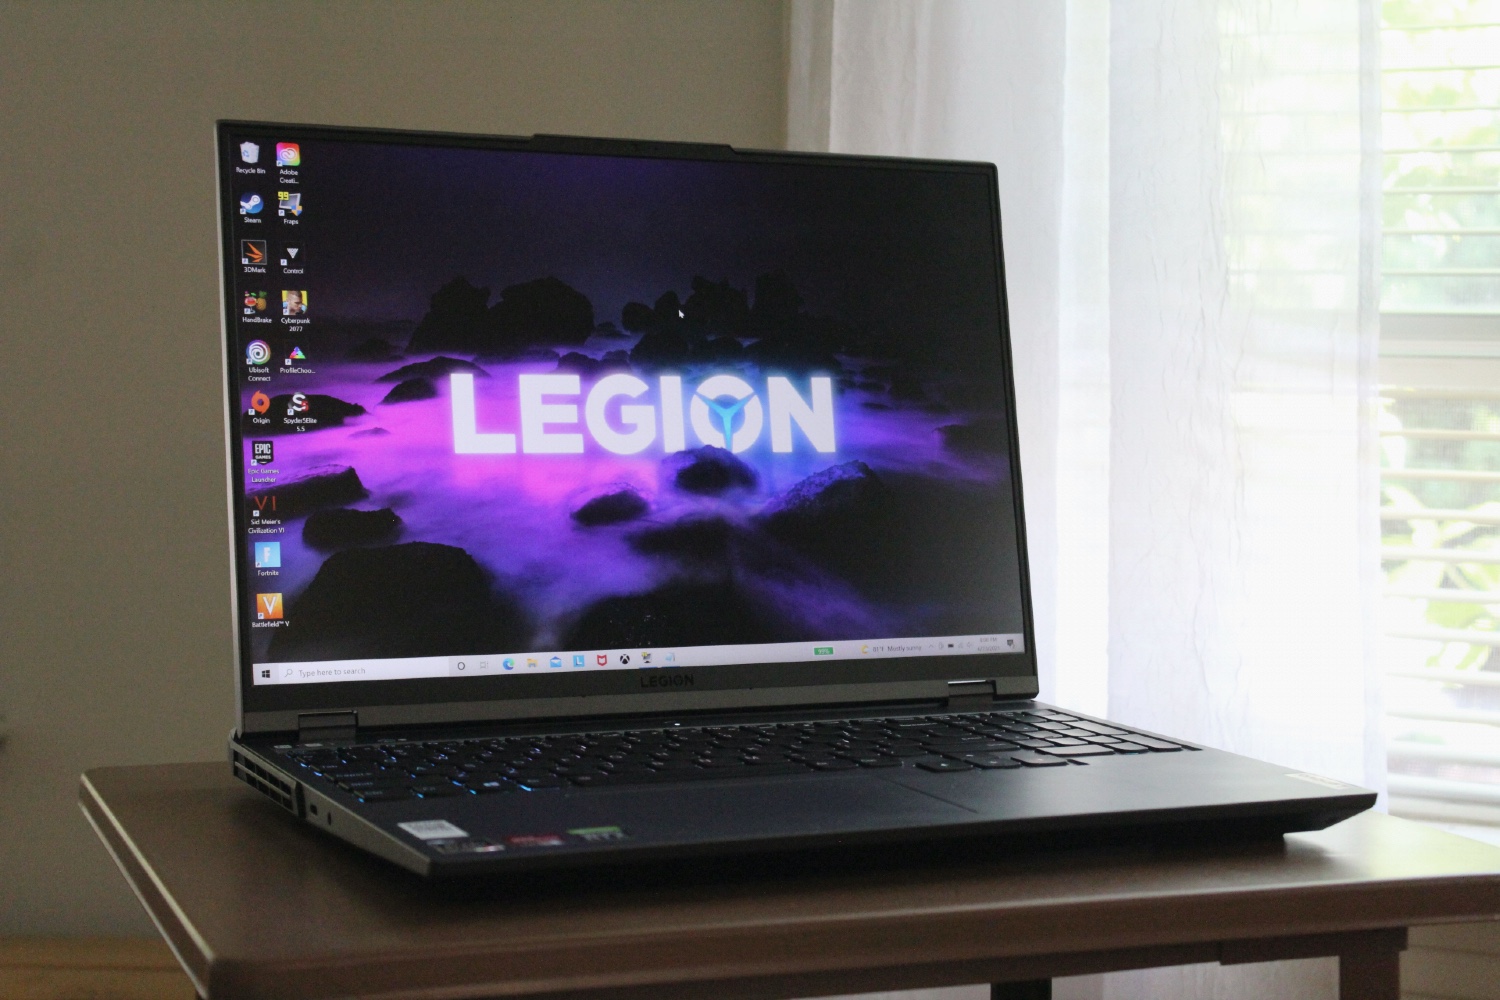 The Lenovo Legion 5 Pro gaming laptop on a table.